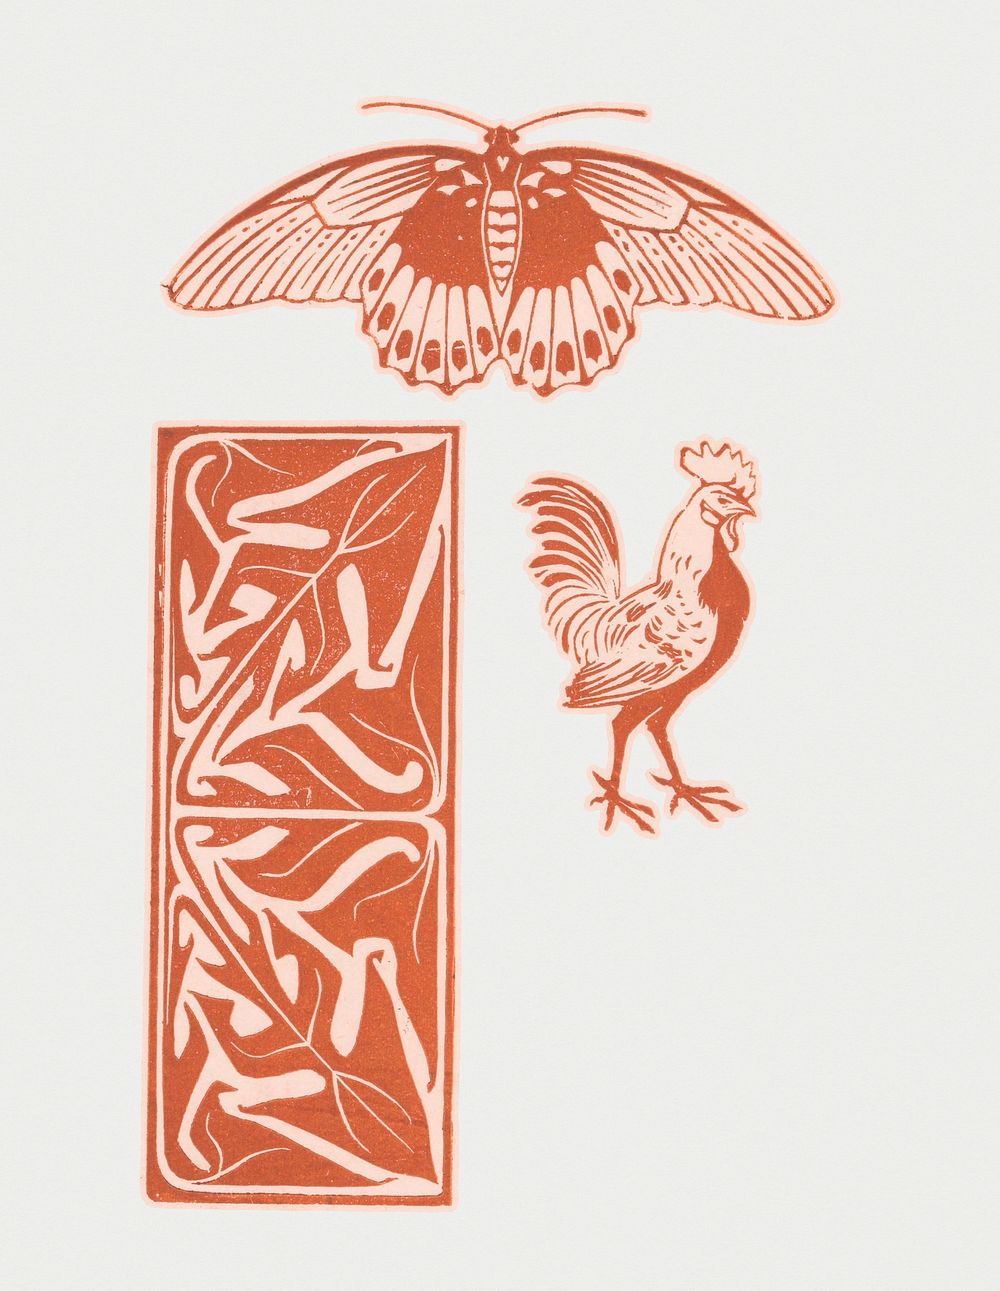 Vintage Illustration of Butterfly, rooster and leaf ornament.